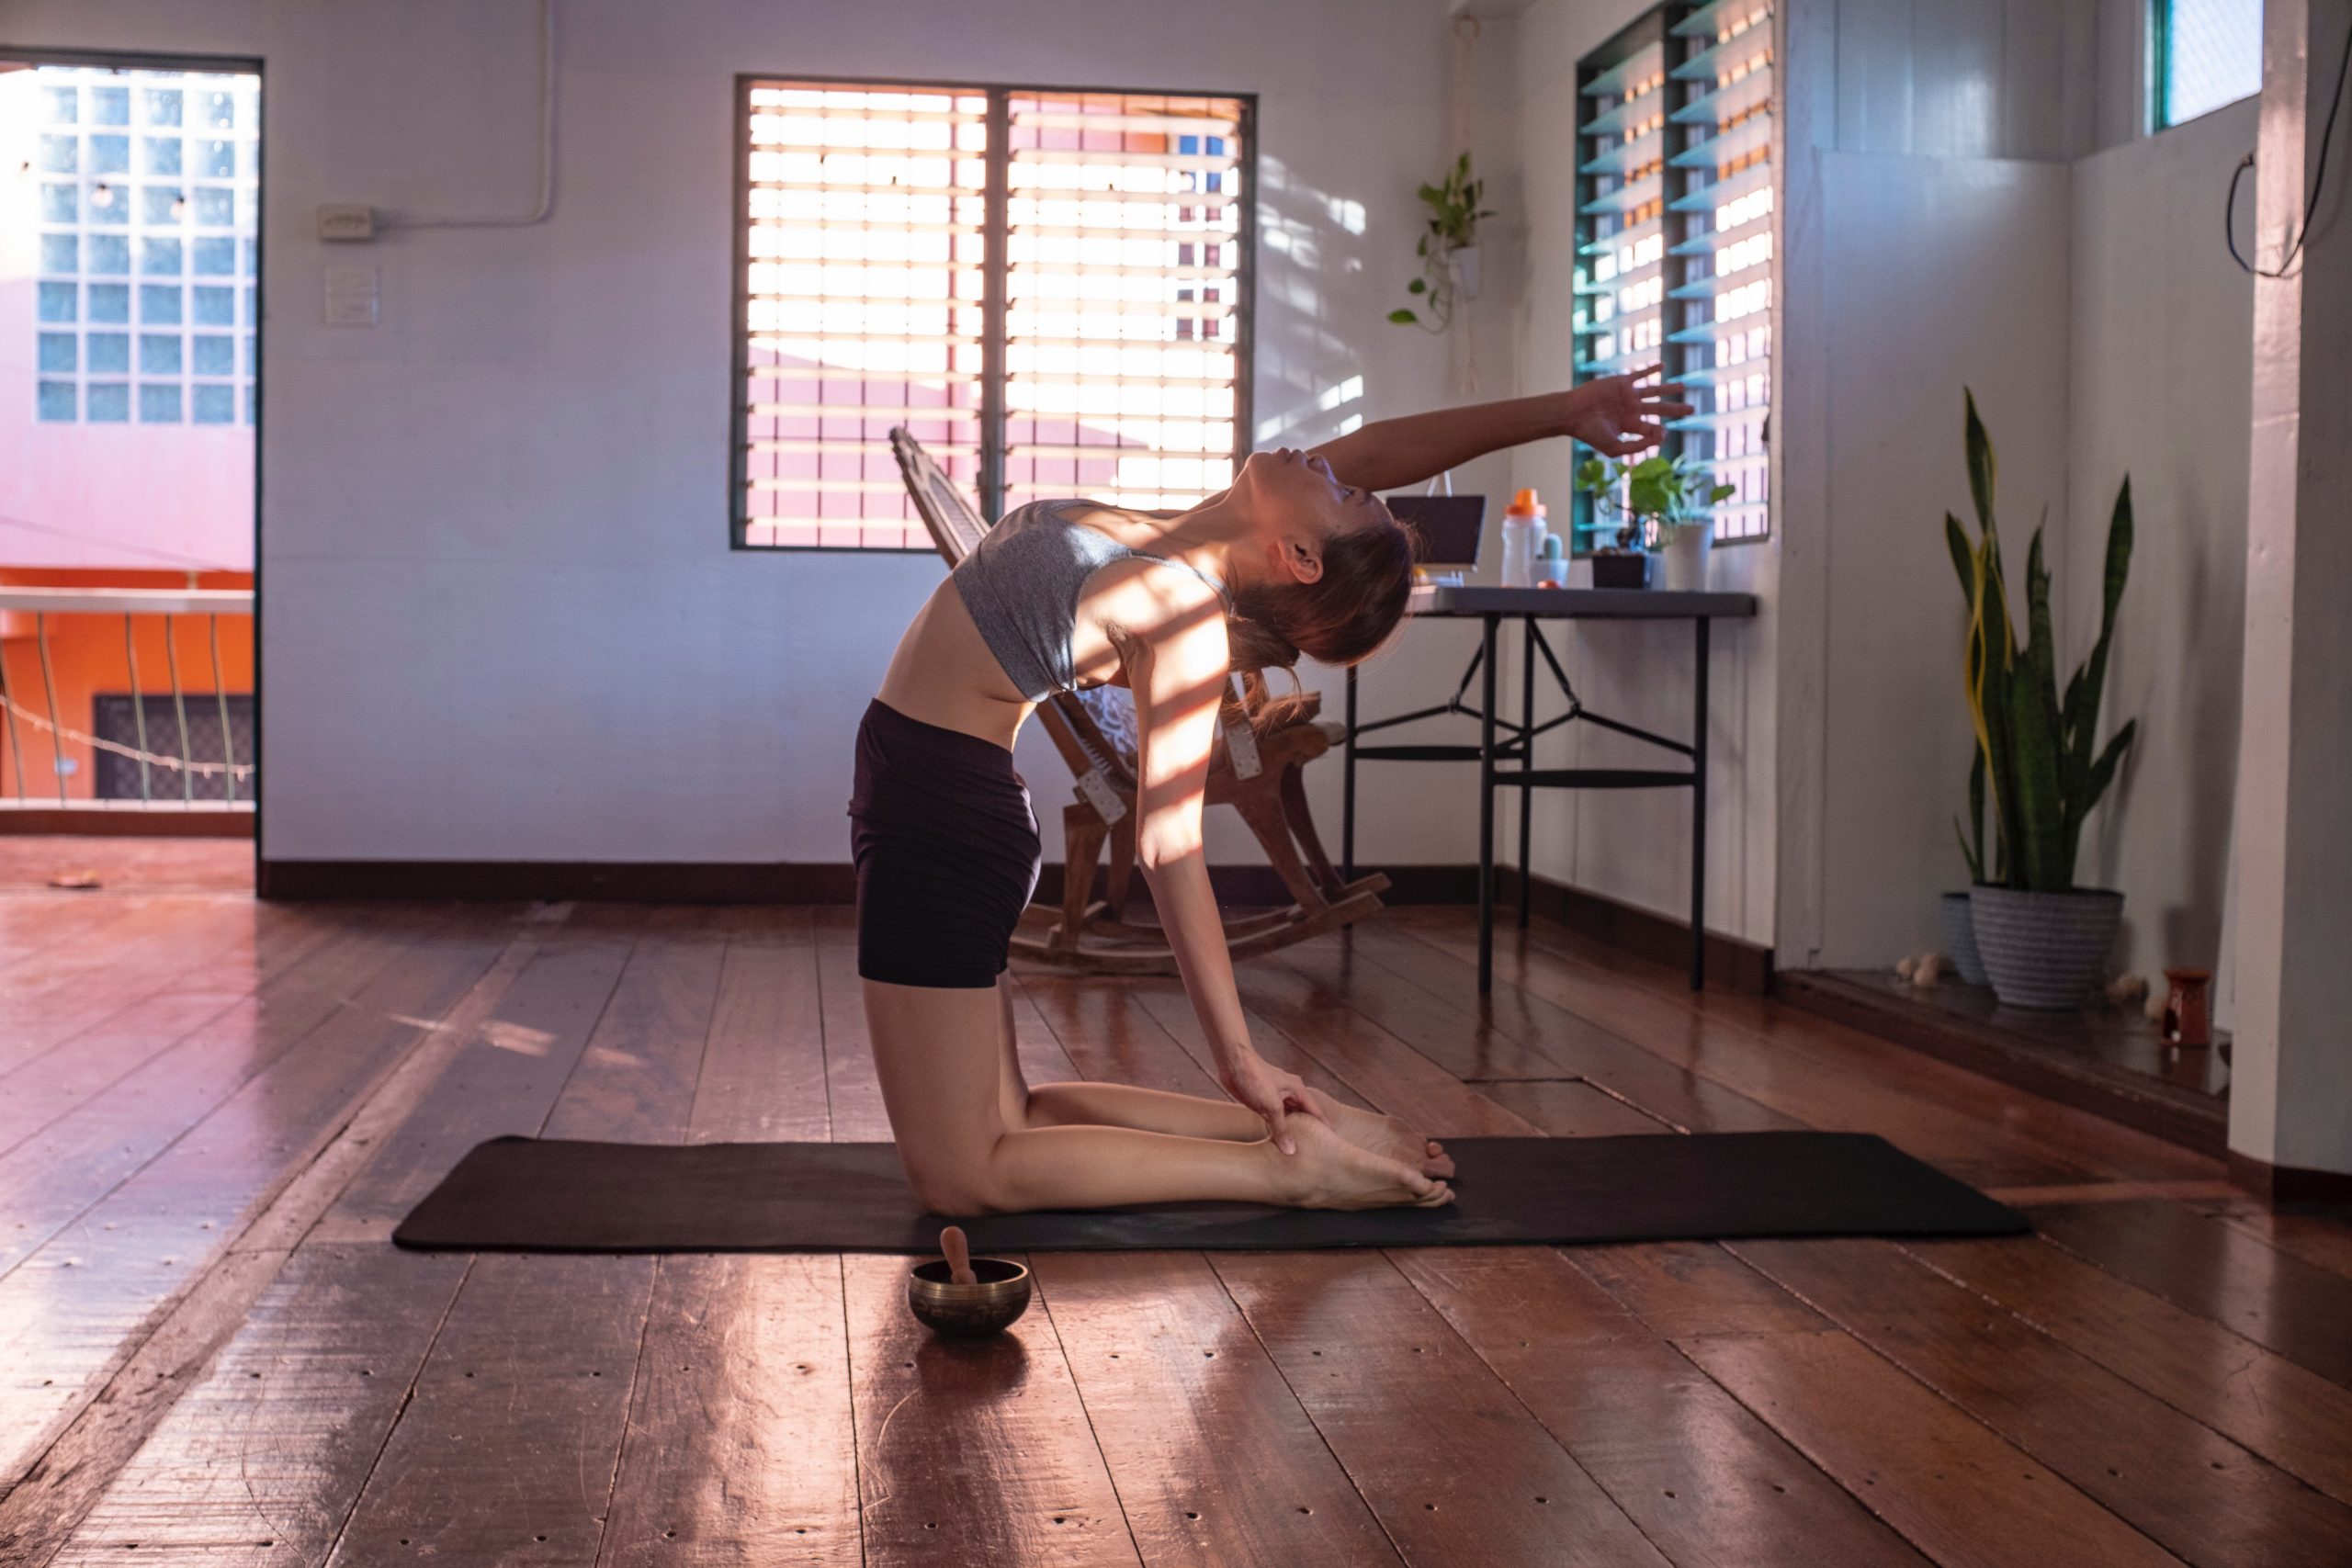 5 Ways to Promote Your Online Yoga Classes 